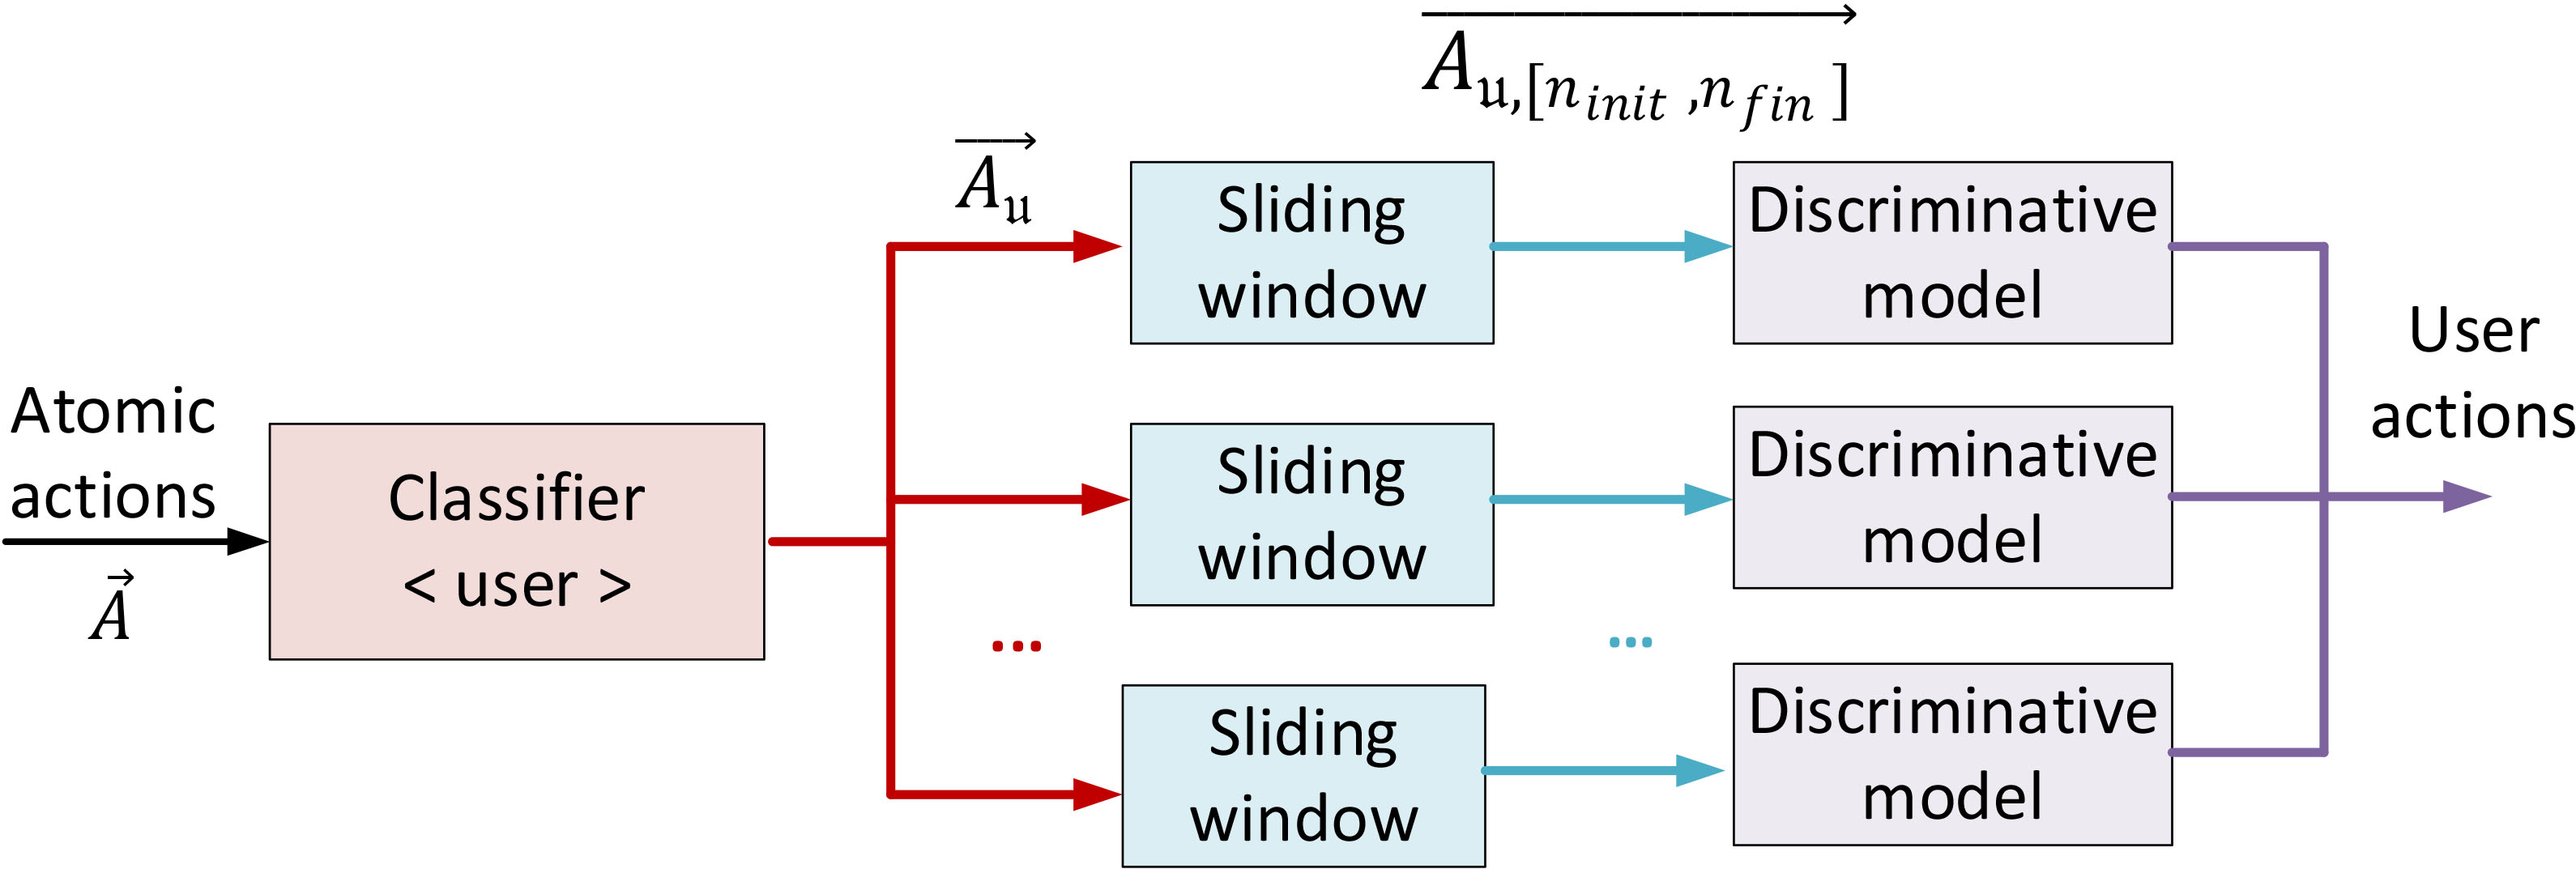 Aggregation process of atomic actions in the modeling phase.